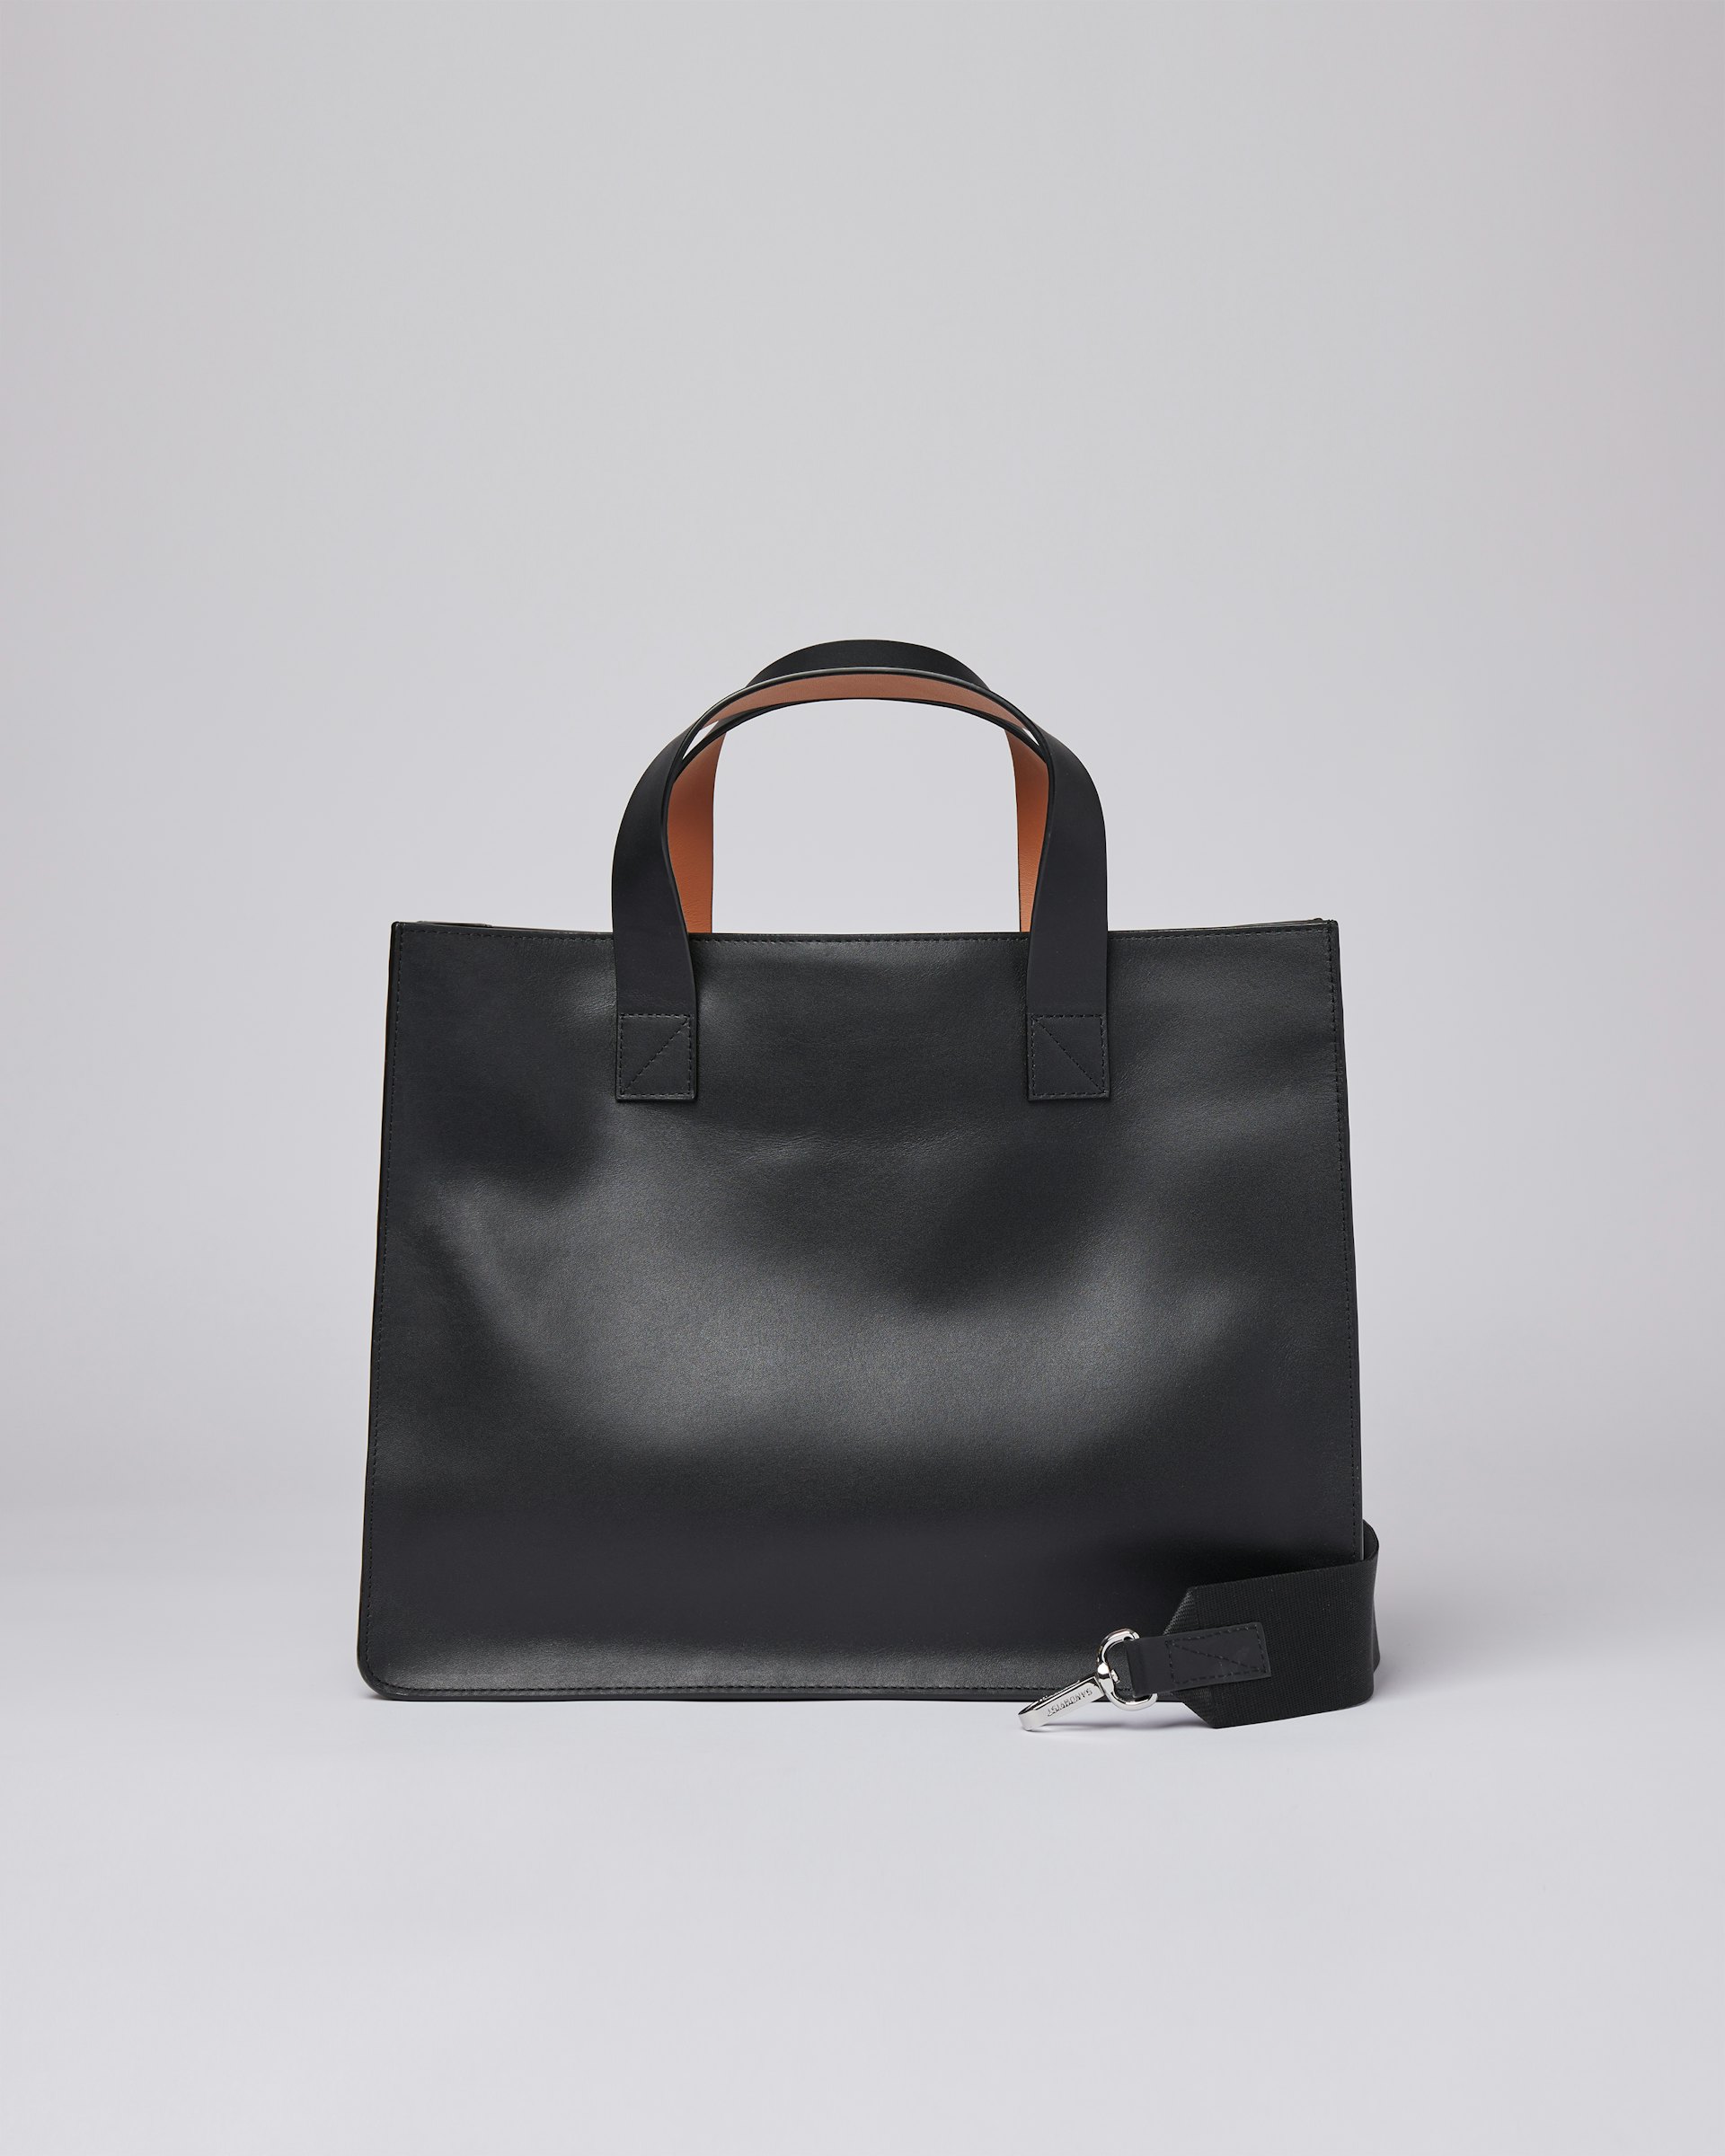 Edie belongs to the category Tote bags and is in color black (3 of 7)